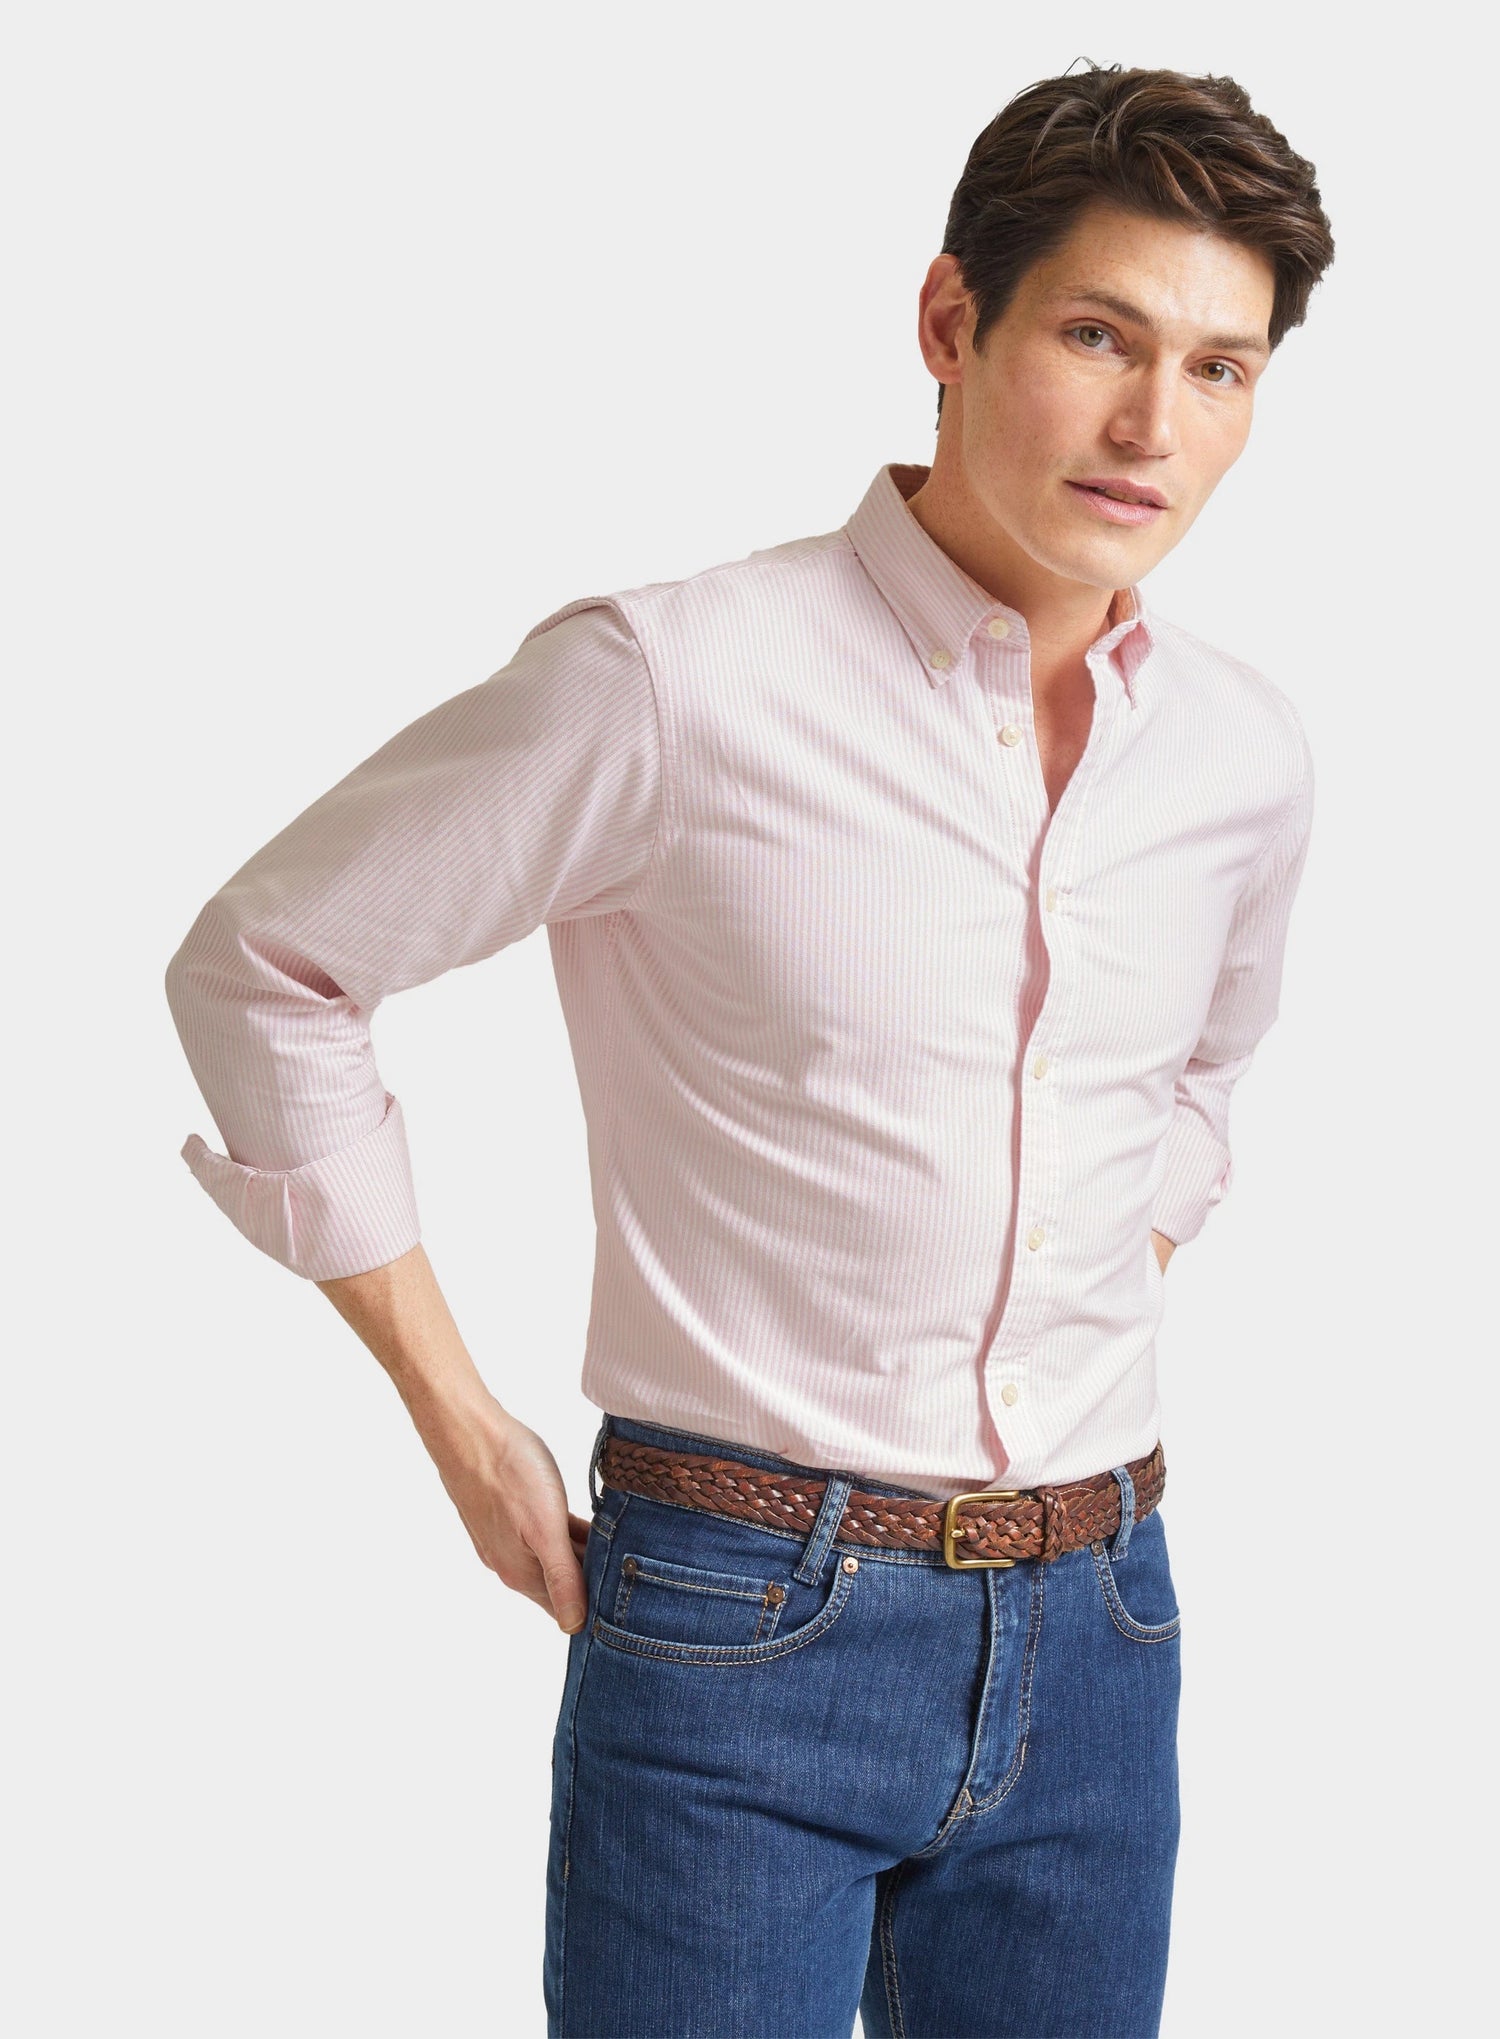 New In | Mens & Womens Collections - Oxford Shirt Co.